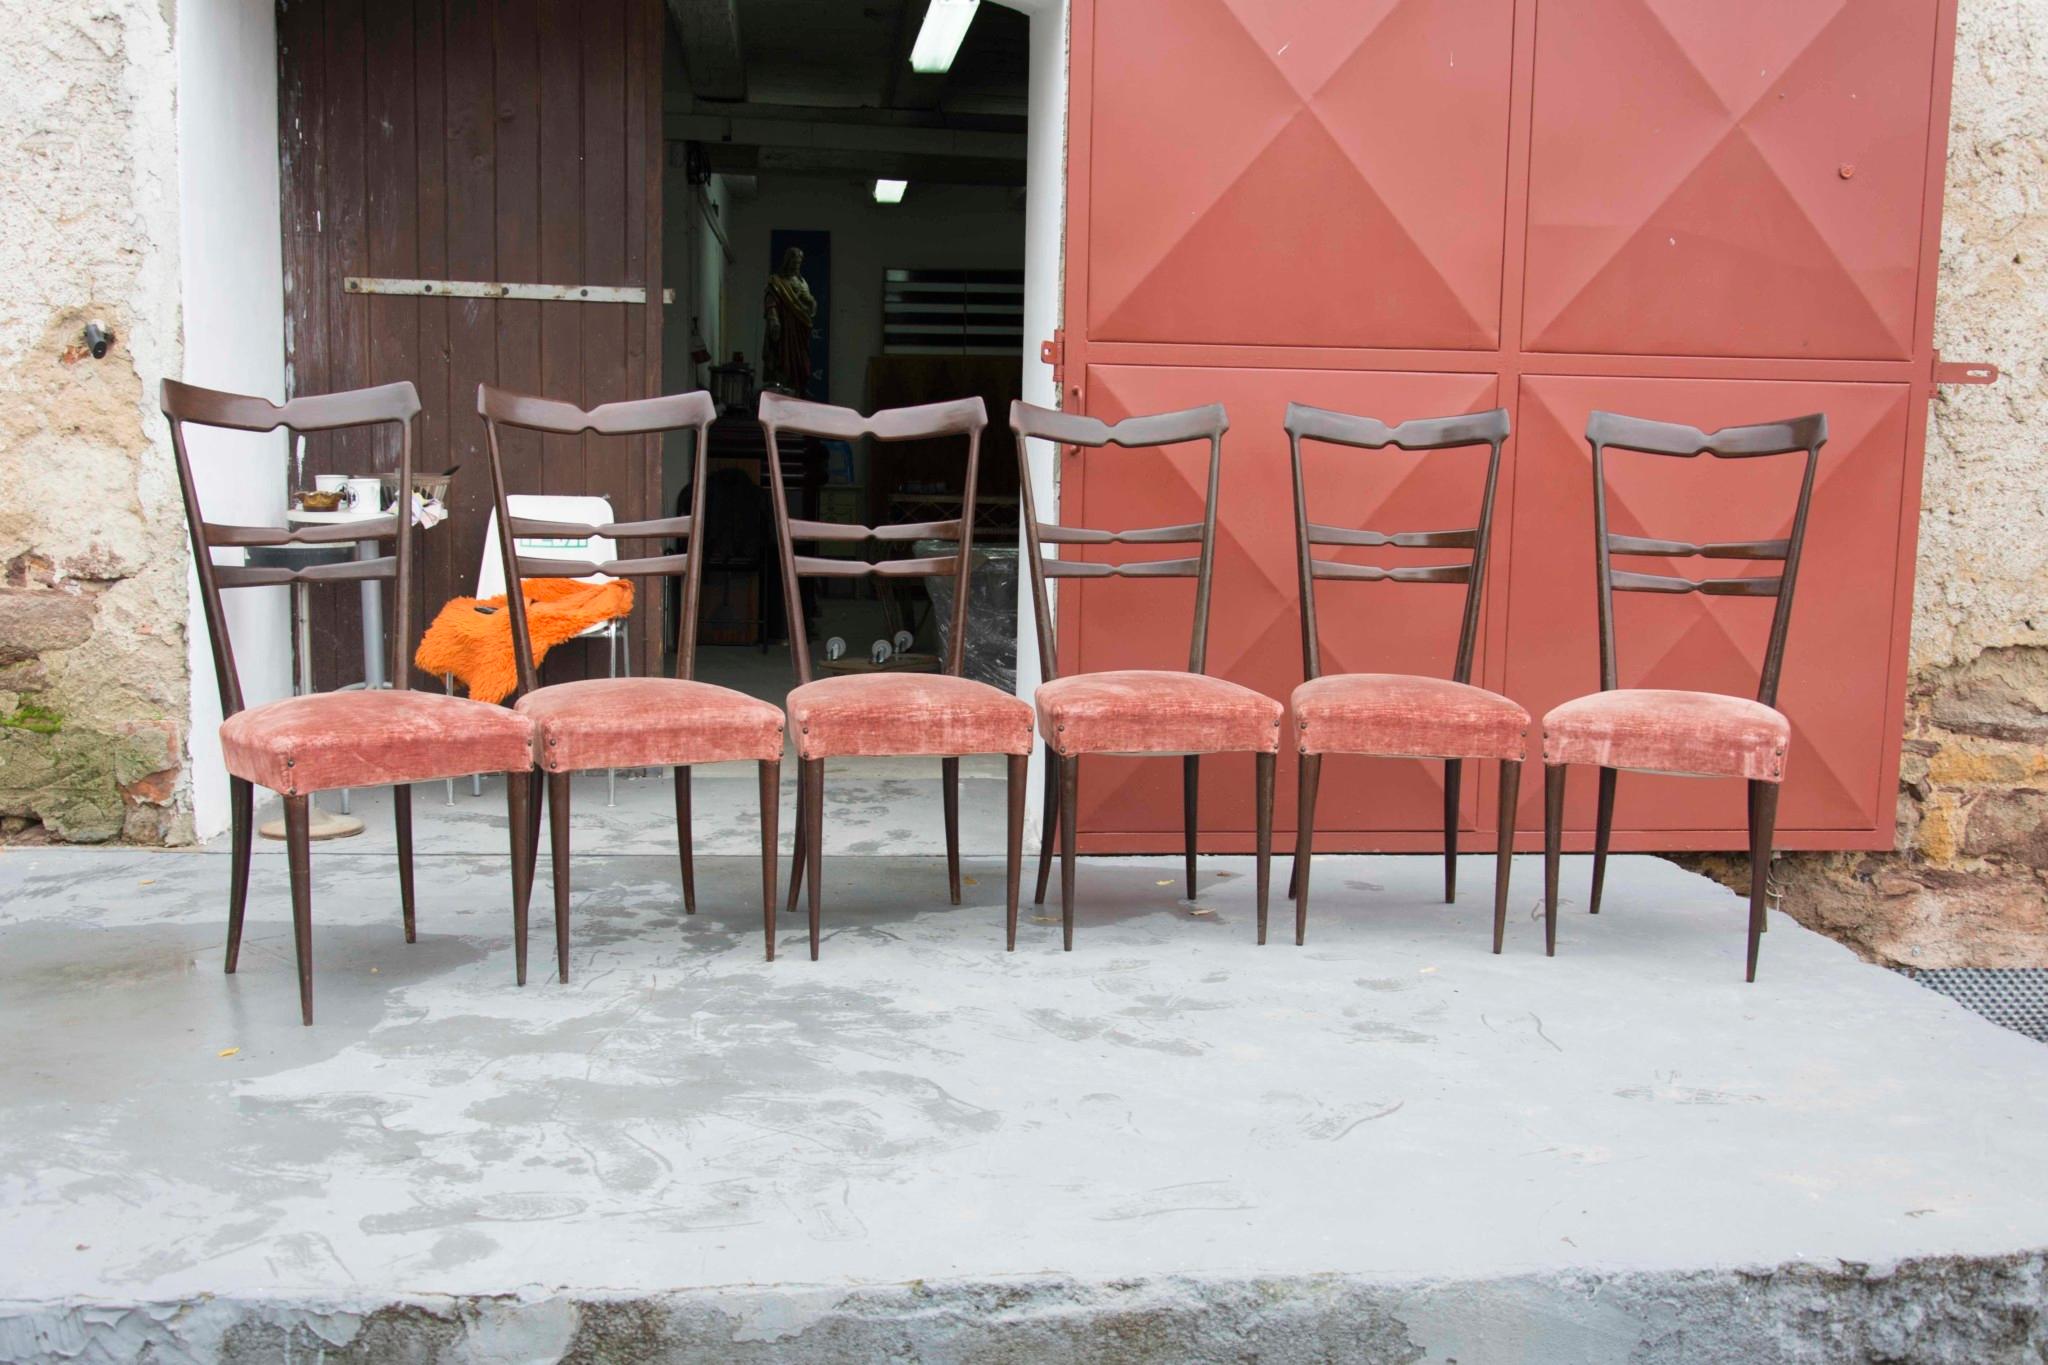 Set of six Italian midcentury dining chairs in the style of Ico Parisi. It was produced in the 1950s. Polished veneer wooden structure and original suede fabric. The chairs features a very simple and attractive design typical of this Italian design